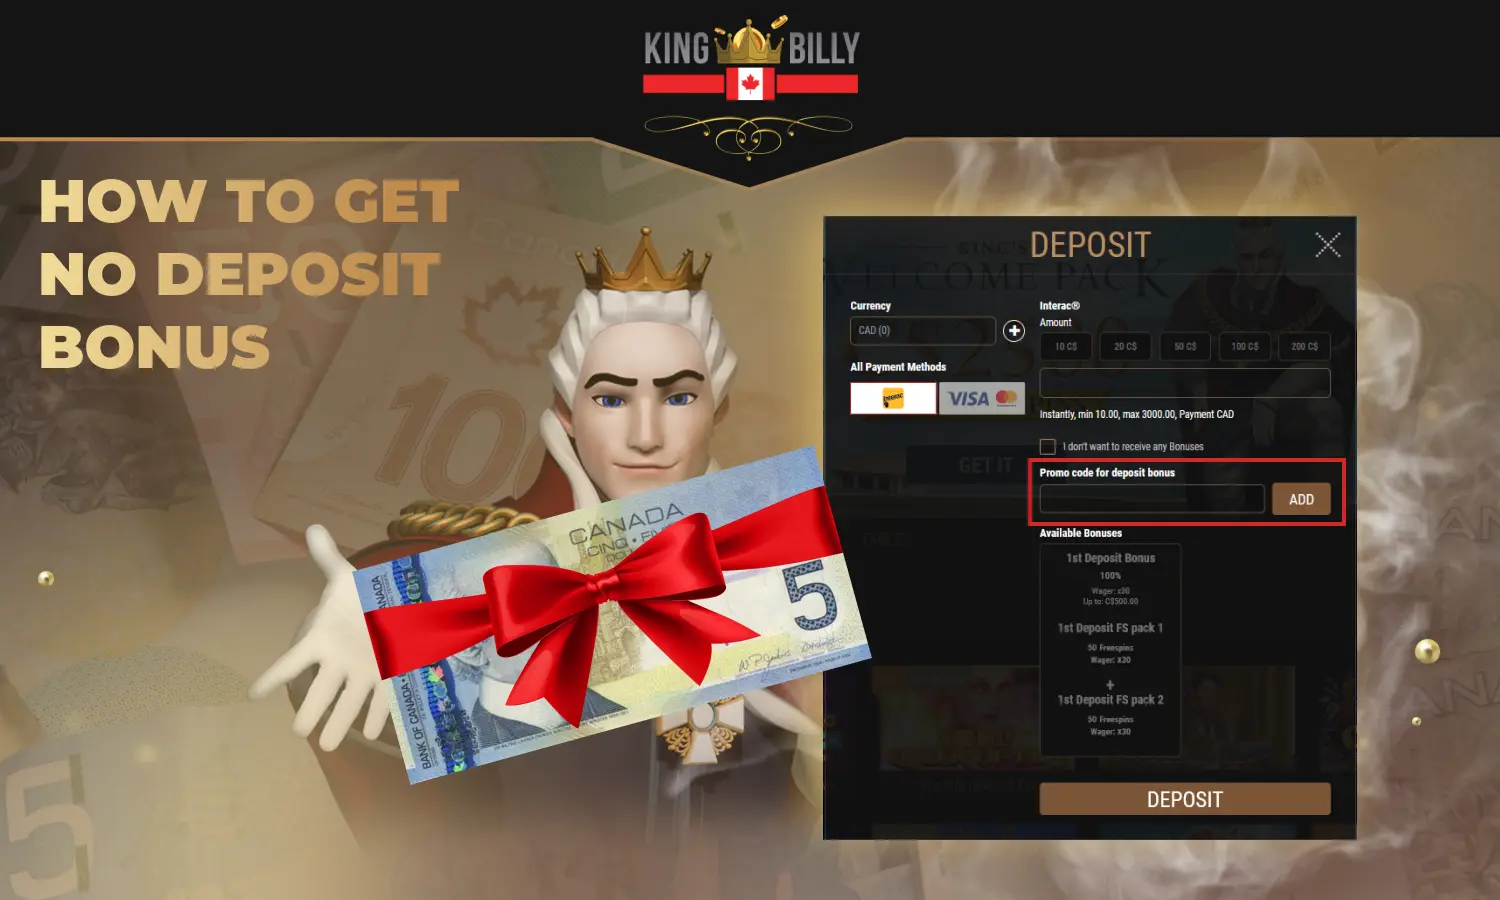 Canadian users can get no deposit bonus in a few minutes after registration at King Billy casino